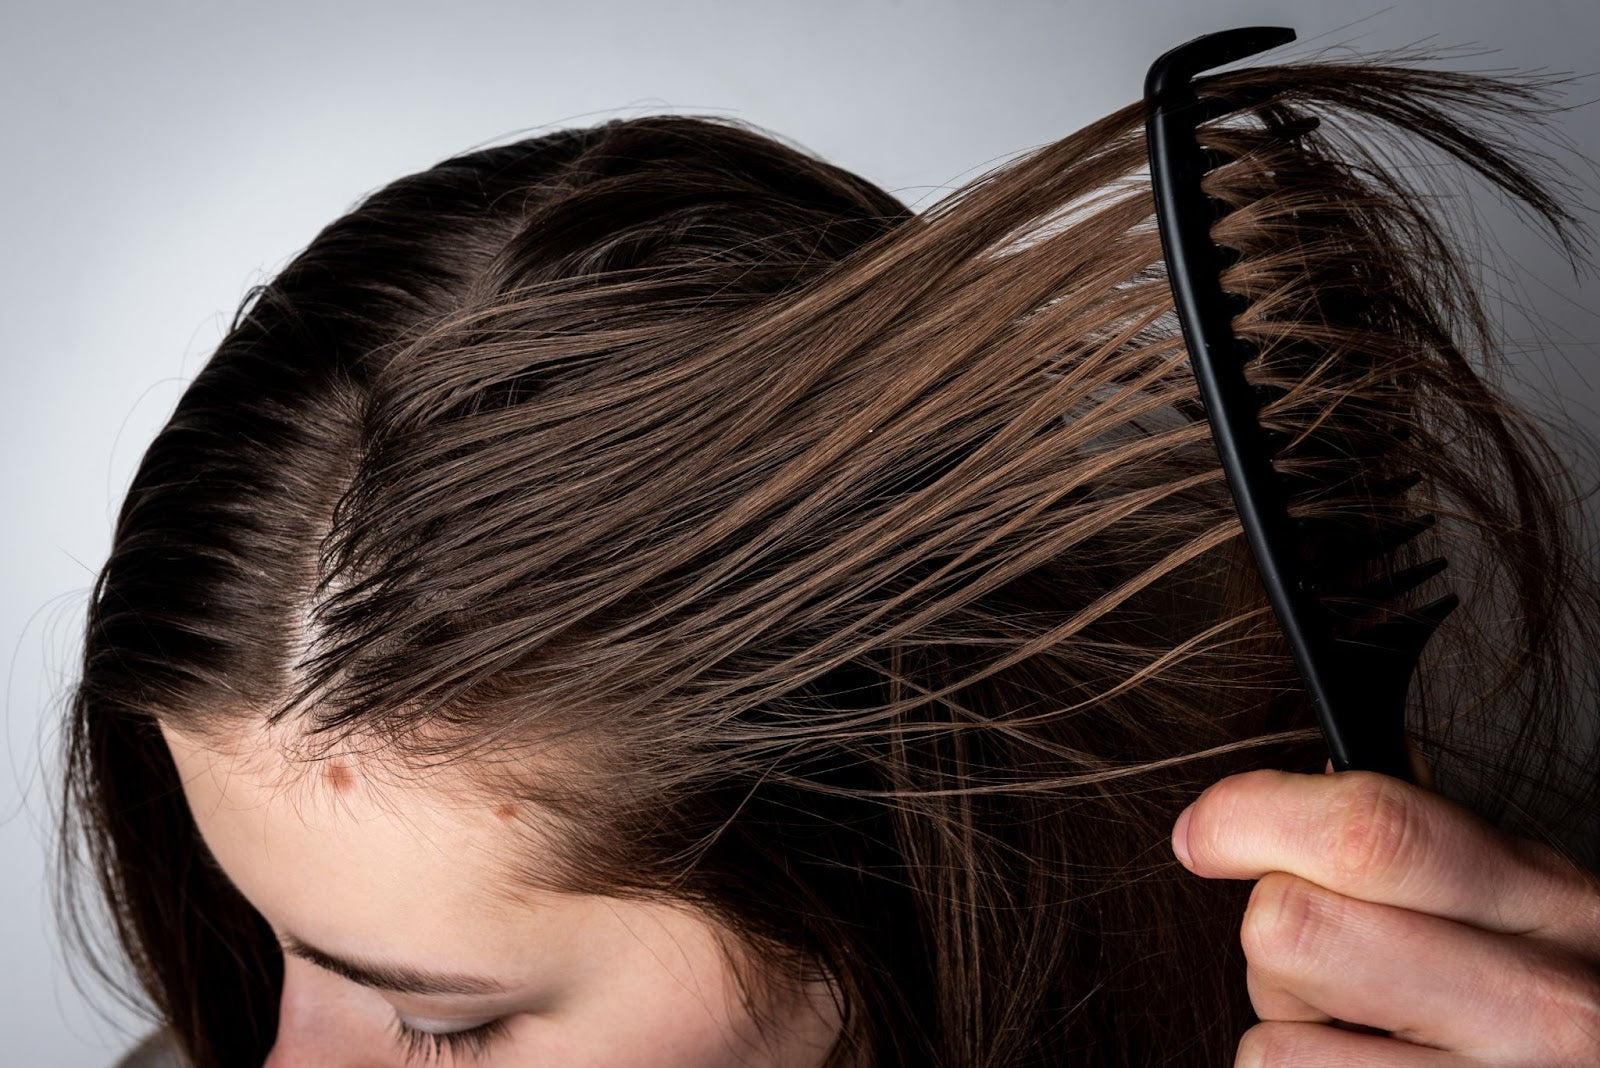 Top Tips to Tame Your Oily Hair and Scalp